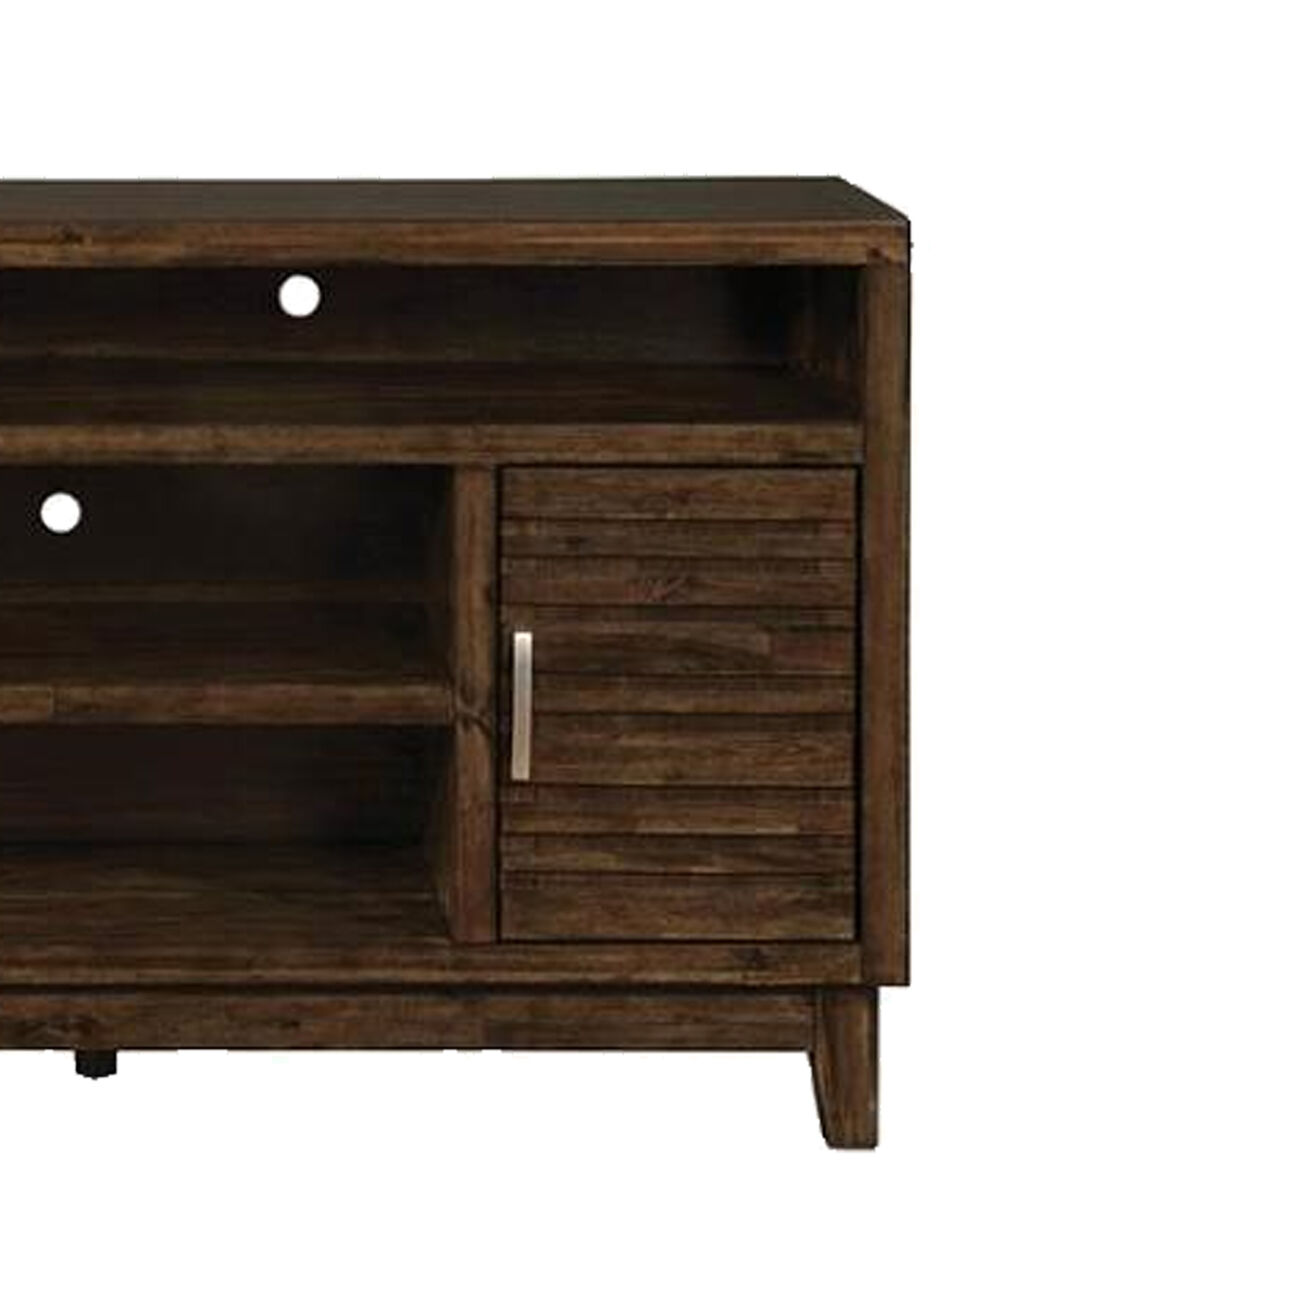 Transitional Style Wooden TV Console with Adjustable Shelf, Brown